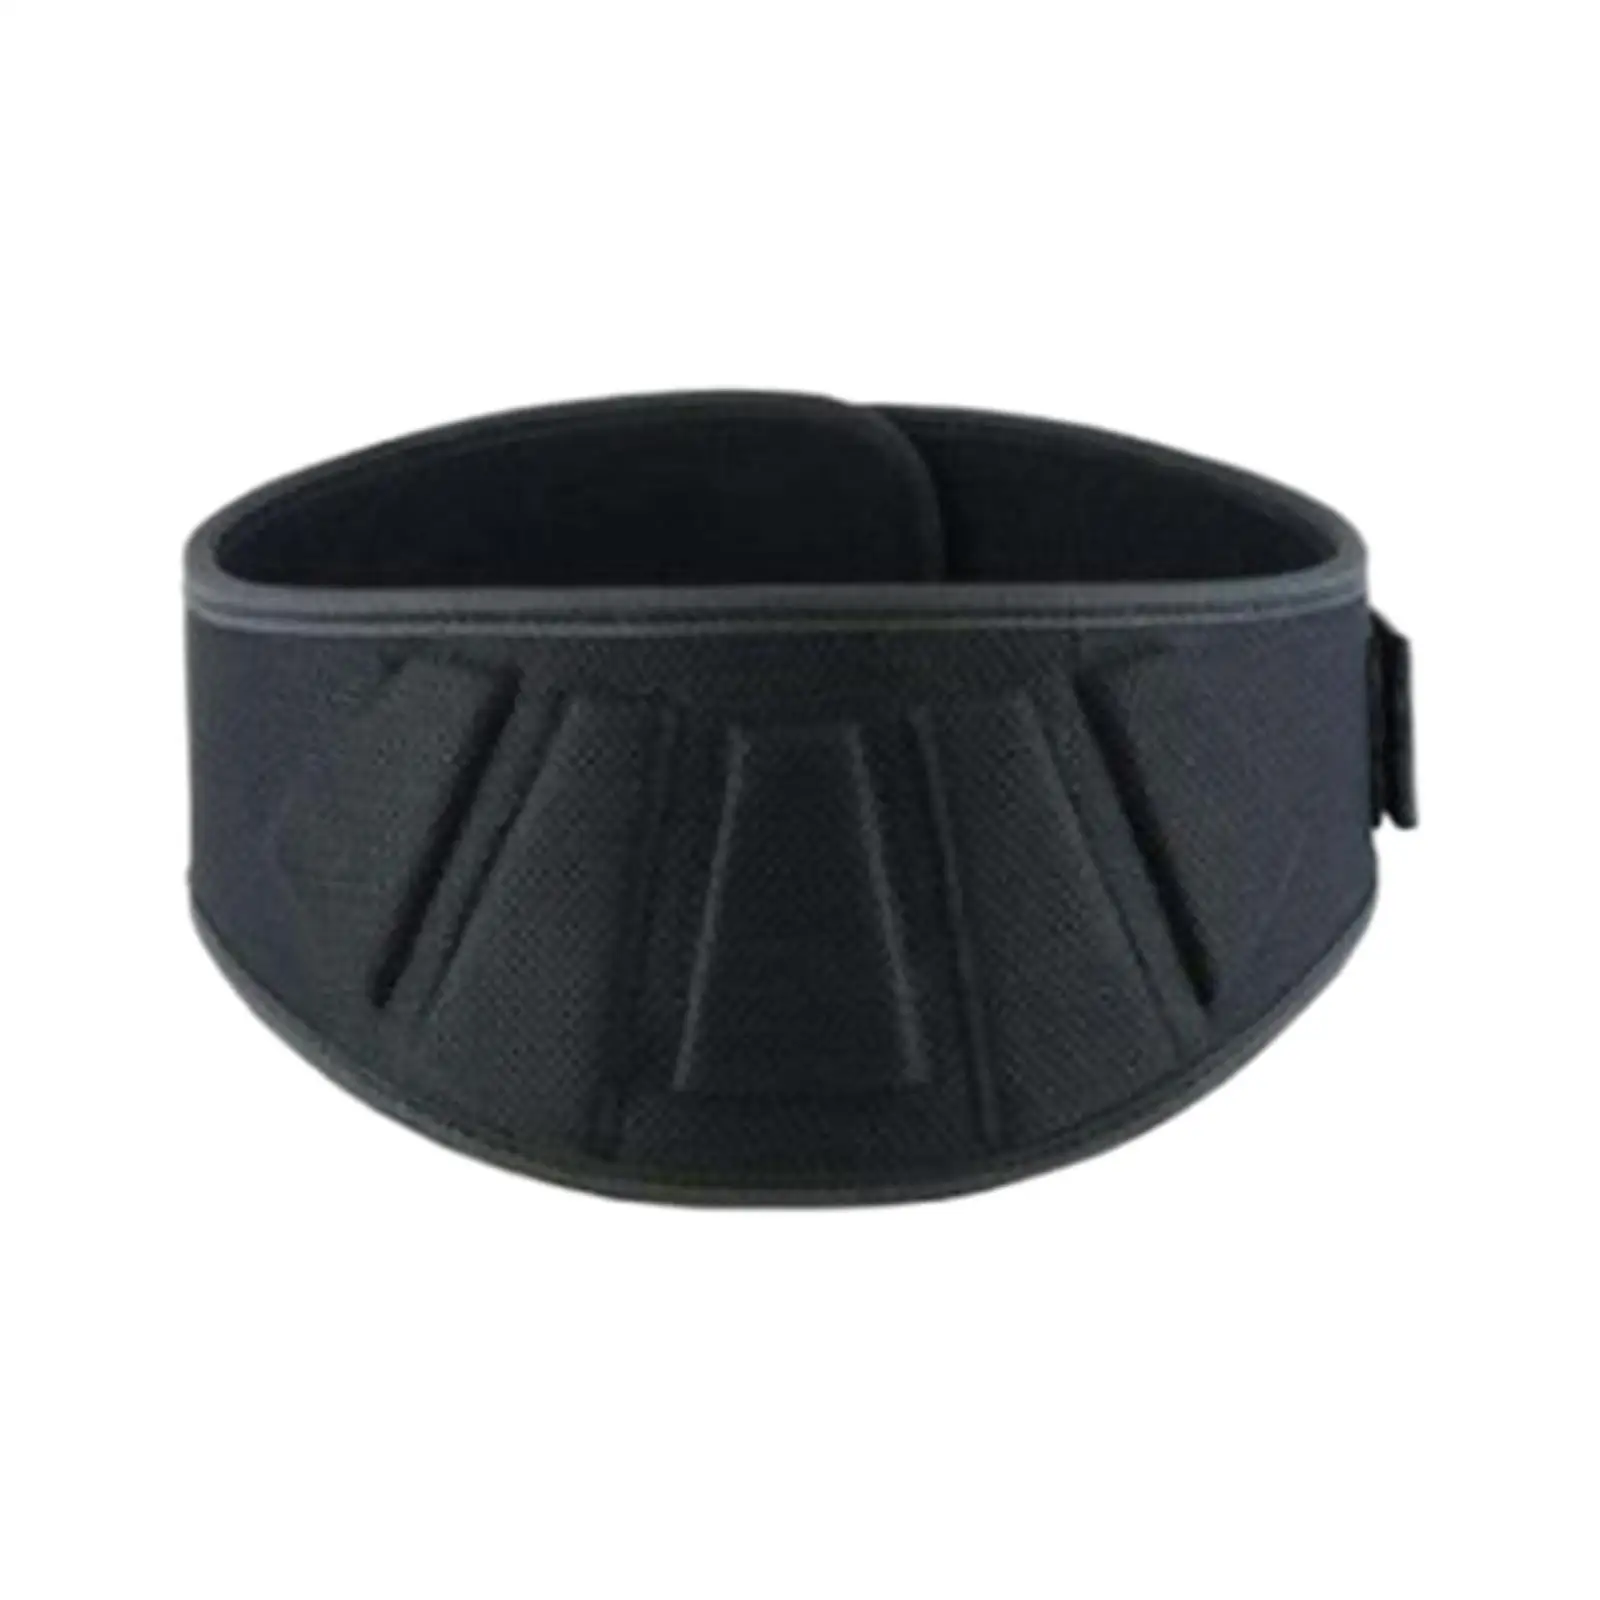 Weight Lifting Belt Waist Support Powerlifting Exercise Weightlifting Belt for Unisex